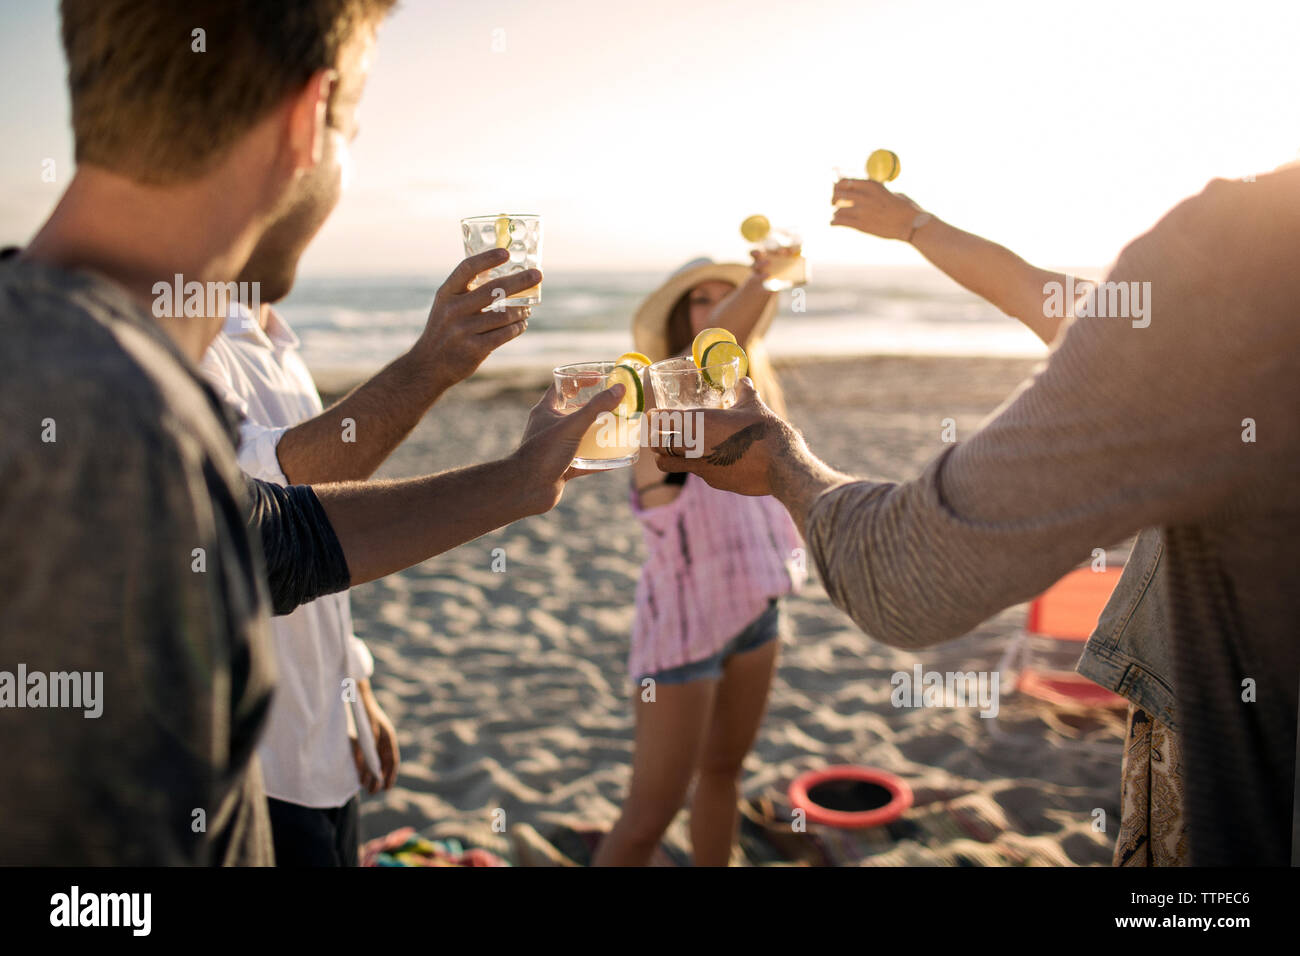 Cheerful friends toasting drinks on beach Banque D'Images